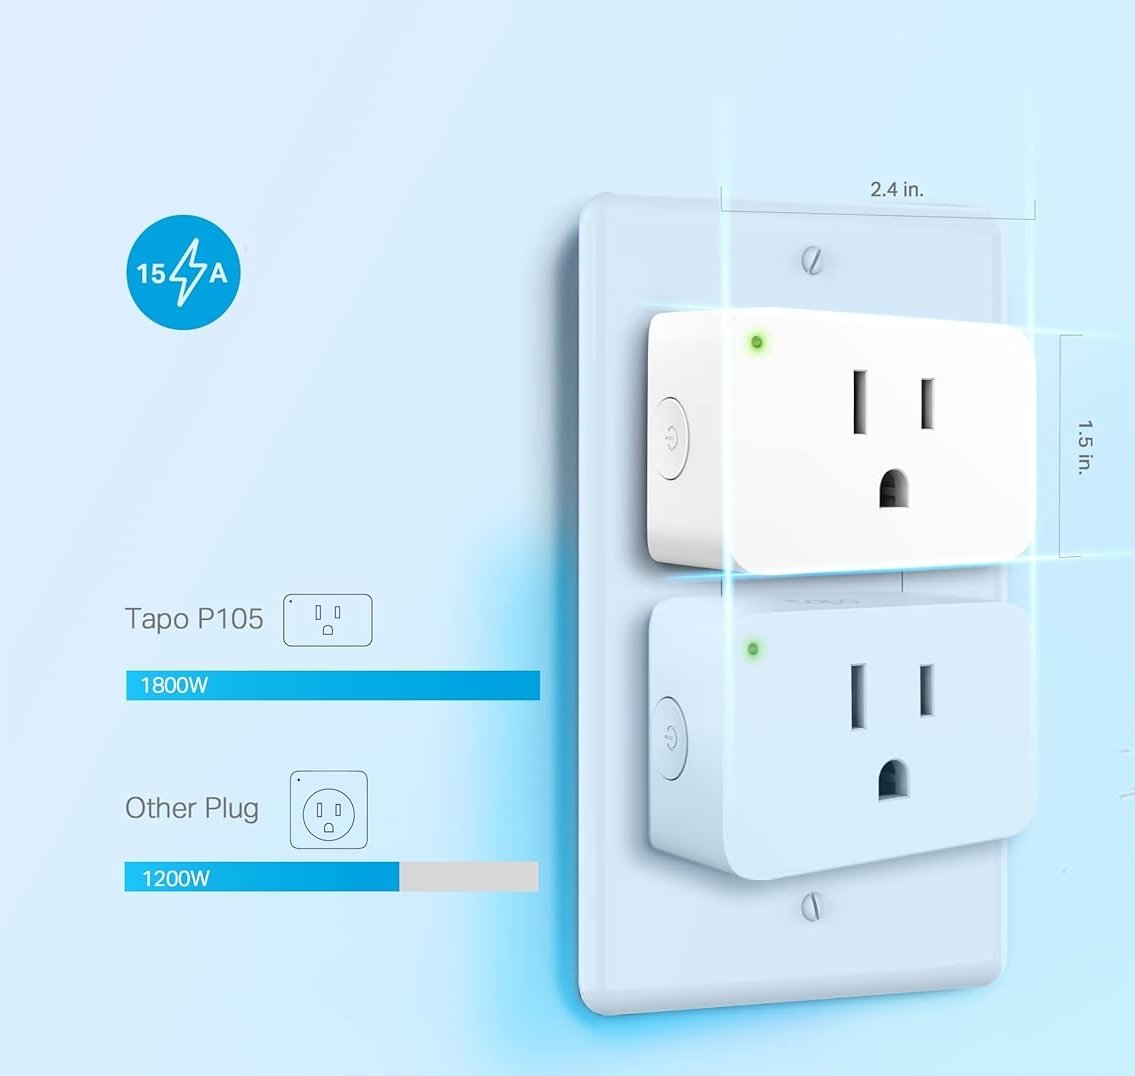 One of the key highlights of this smart plug is its compatibility with popular voice assistants such as Alexa and Google Home. T